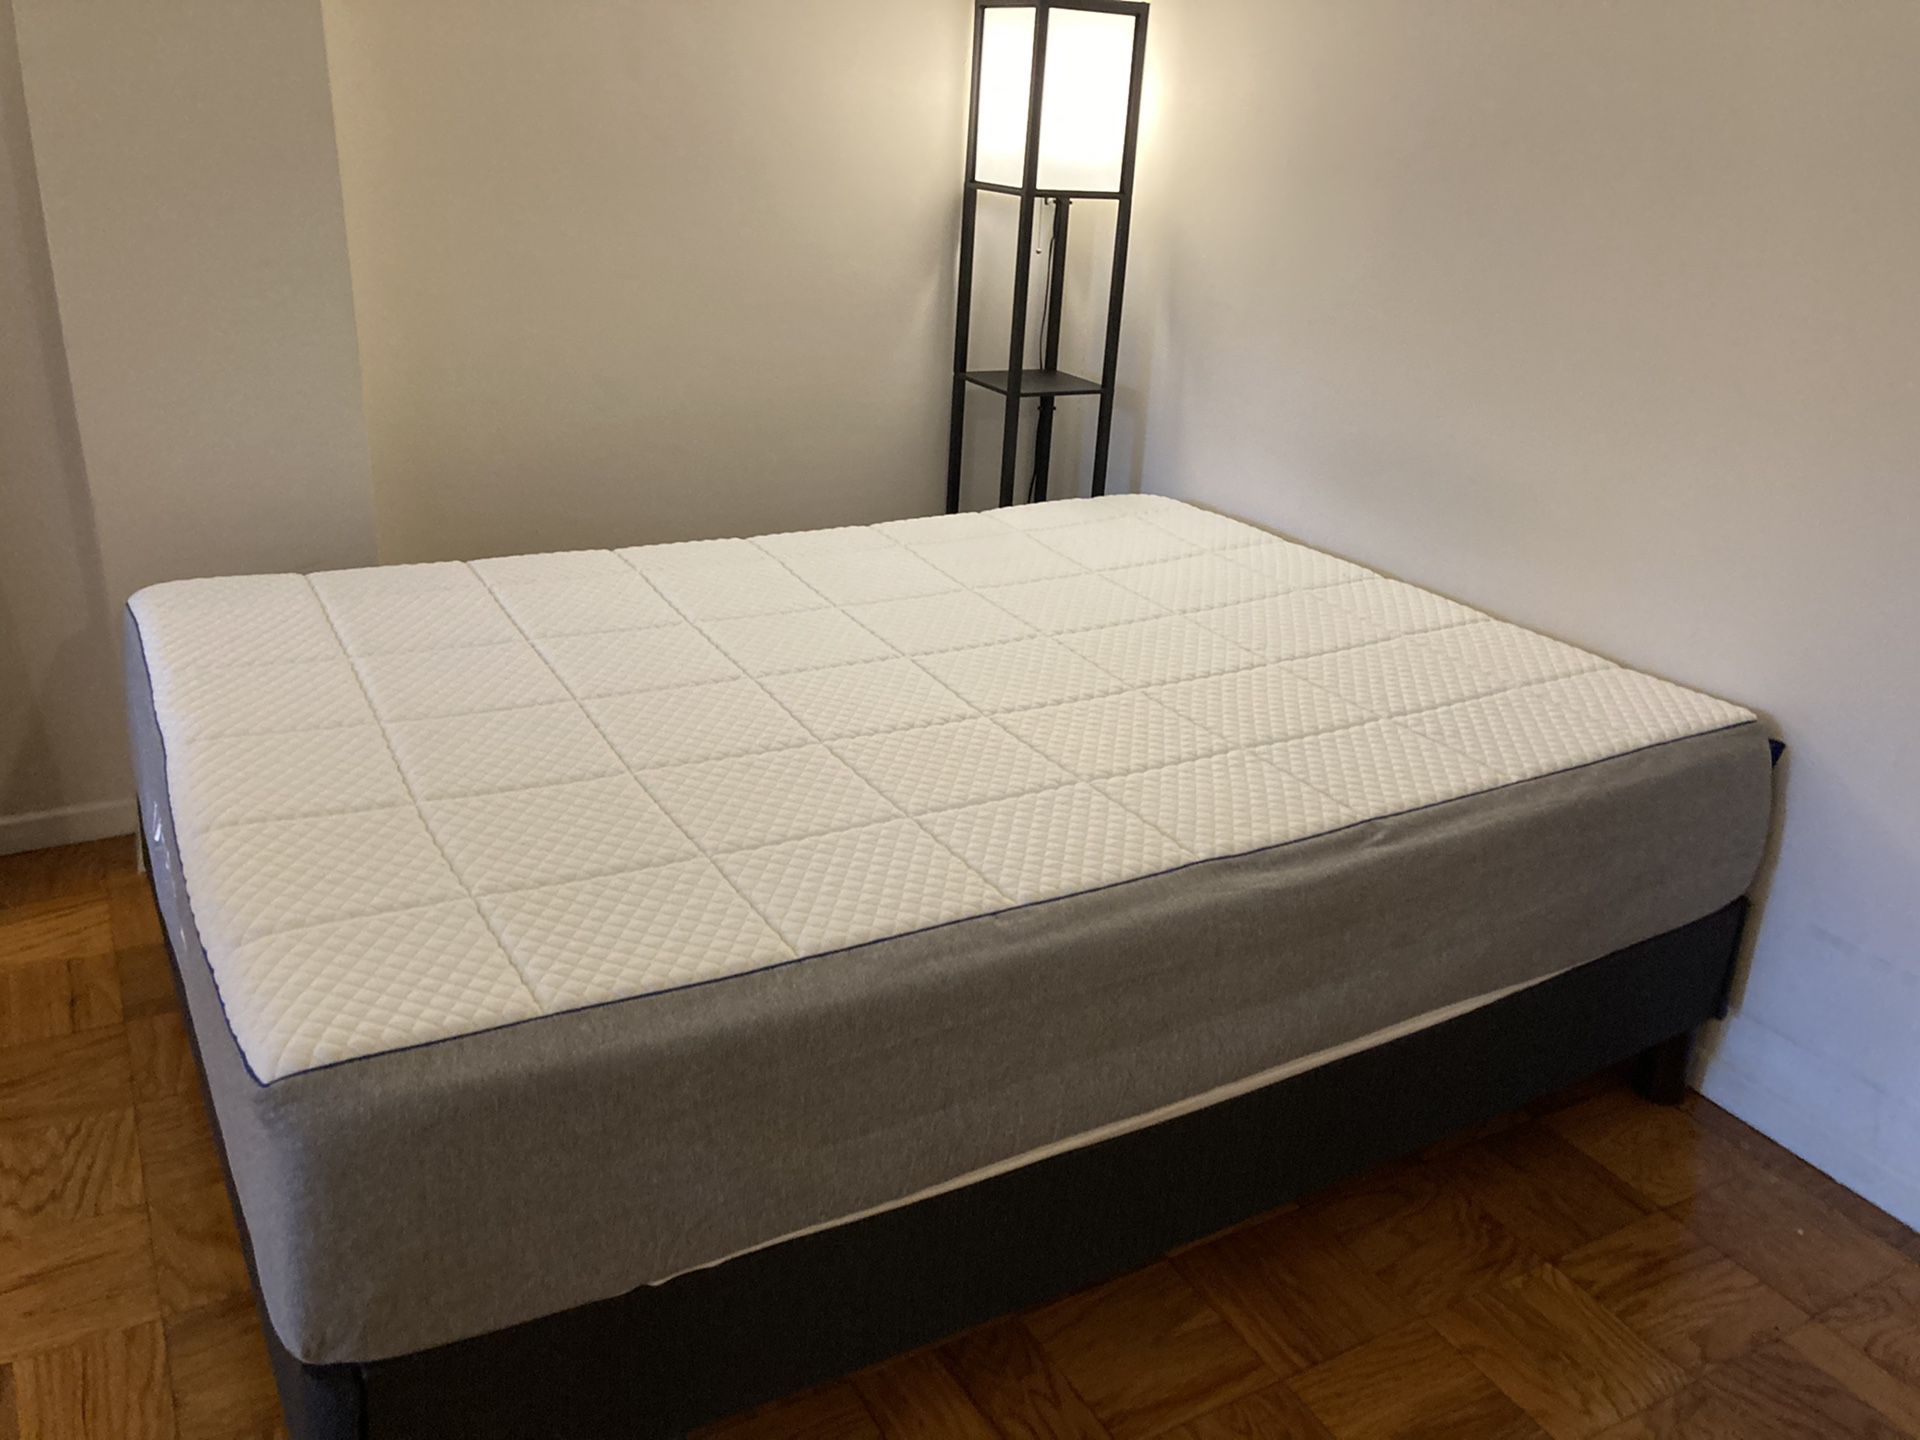 Nectar queen bed, protector and base/frame less than 6 months old